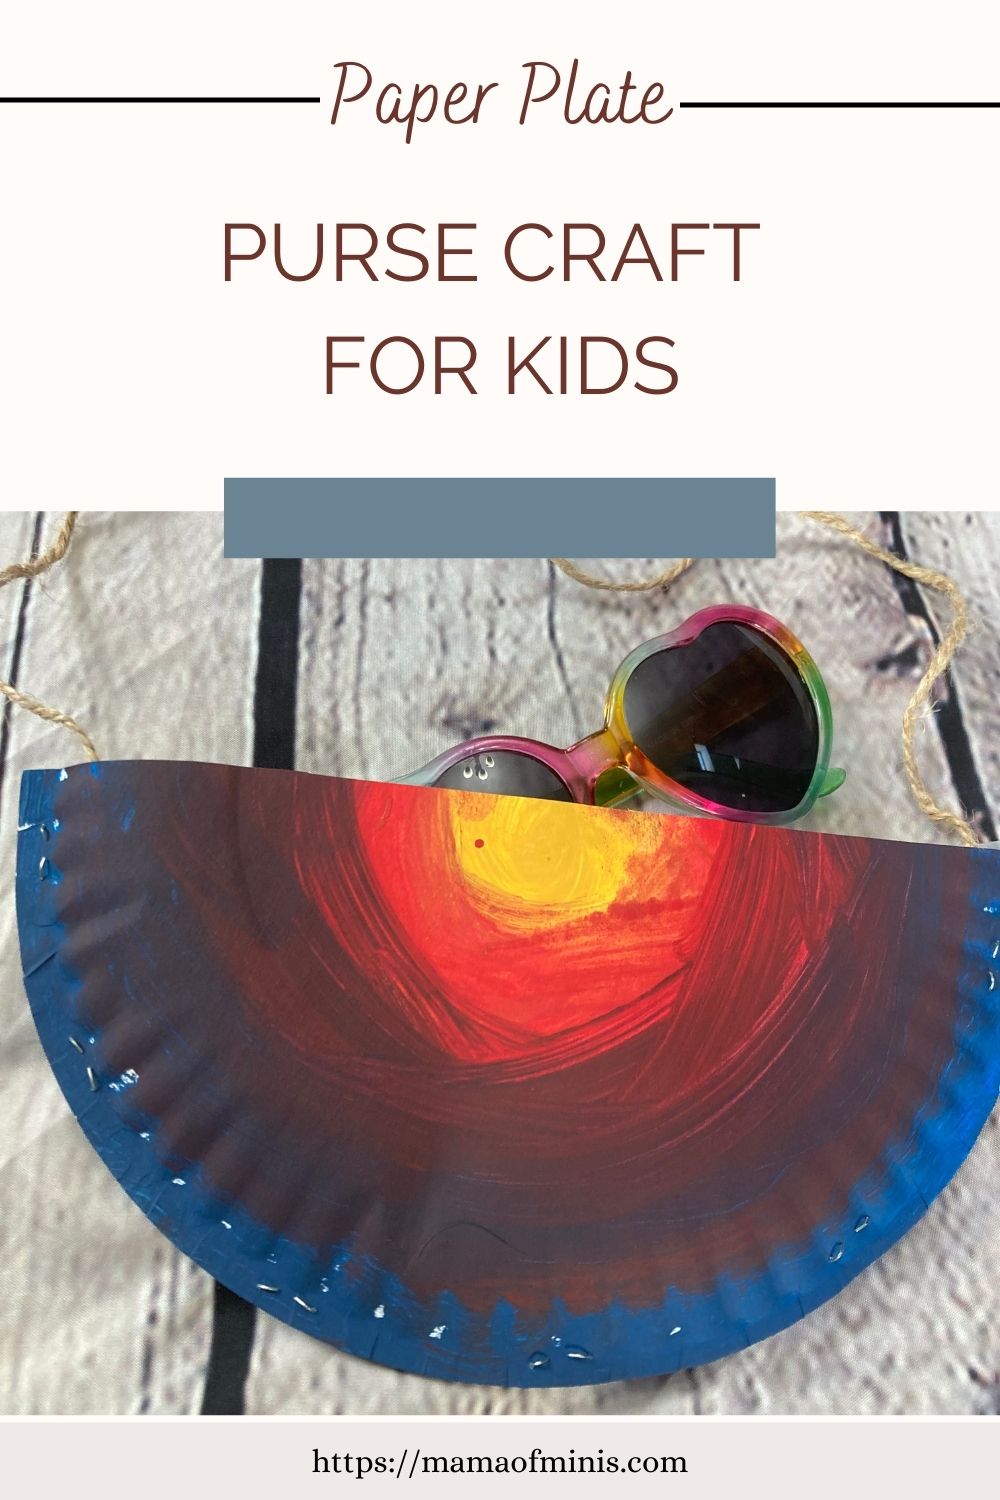 Paper Plate Purse Craft for Kids Pin